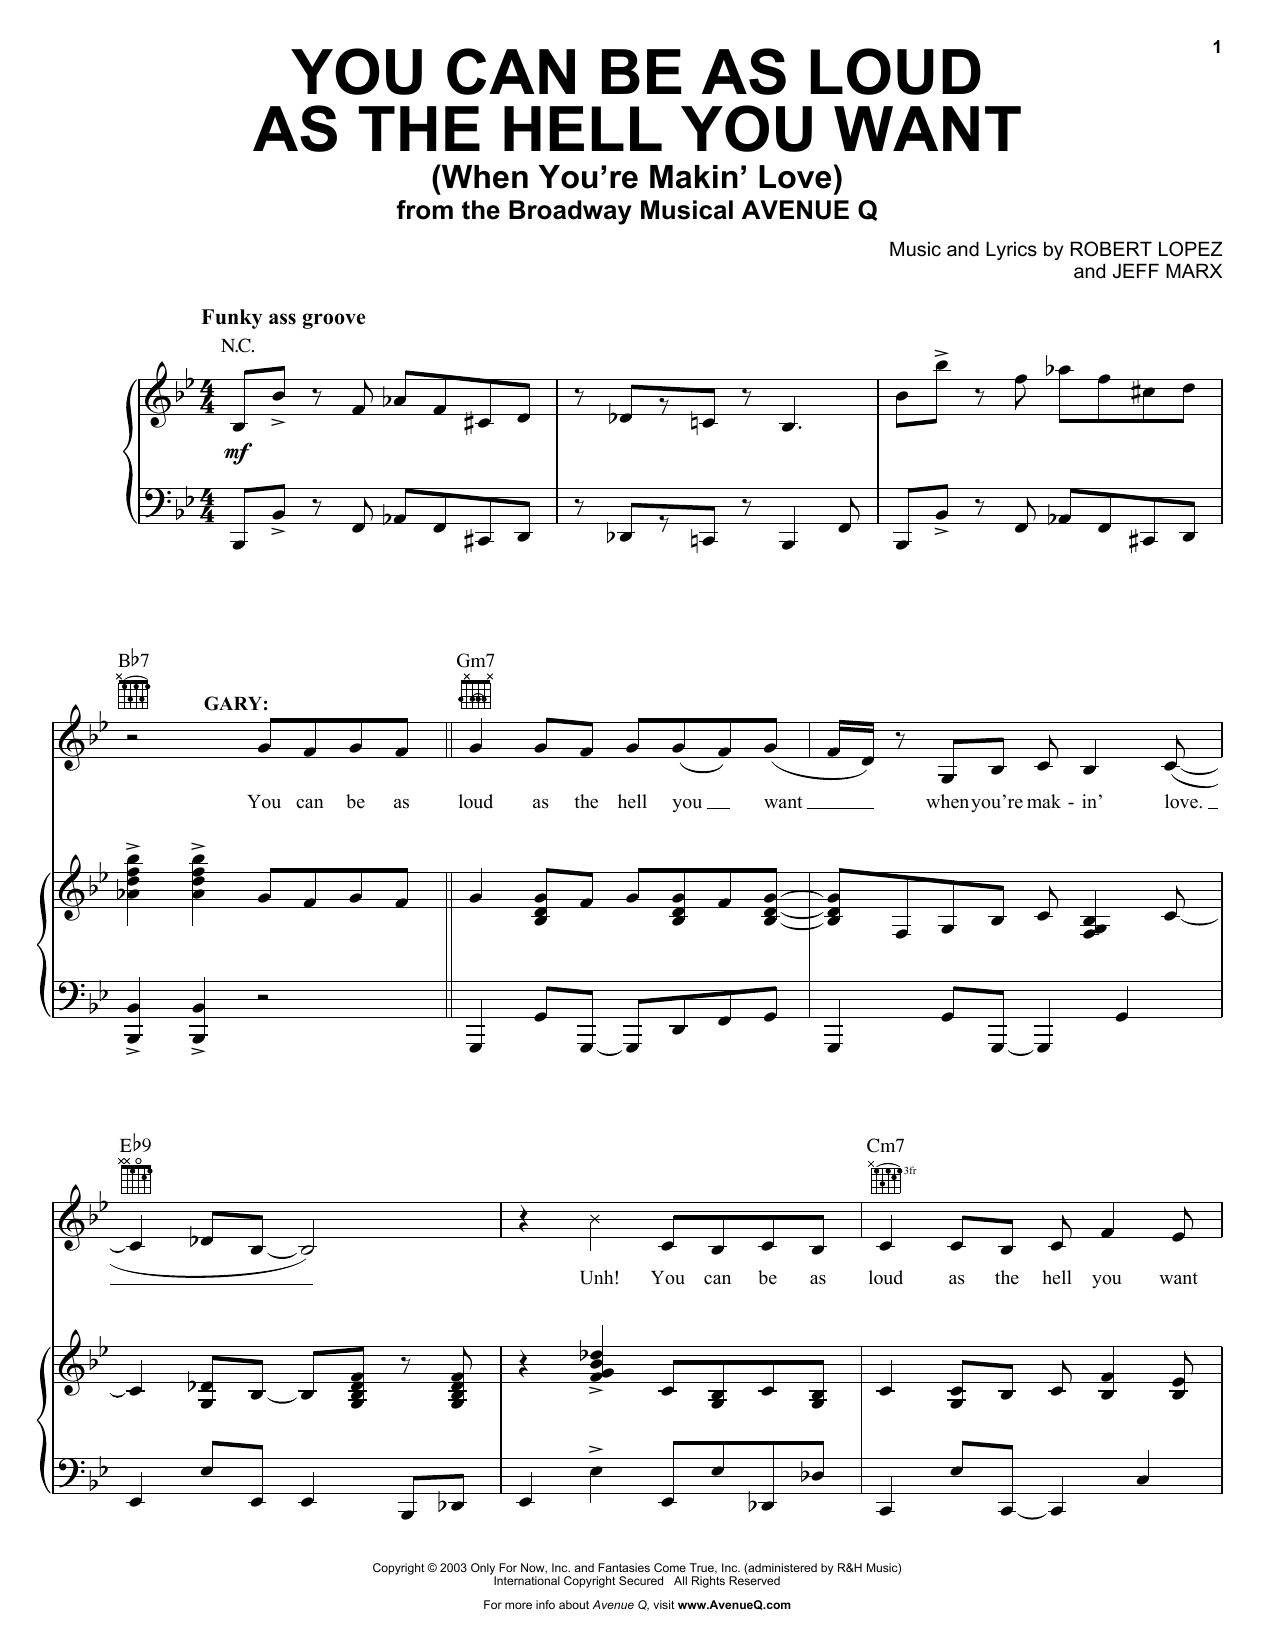 Download Robert Lopez & Jeff Marx You Can Be As Loud As The Hell You Want Sheet Music